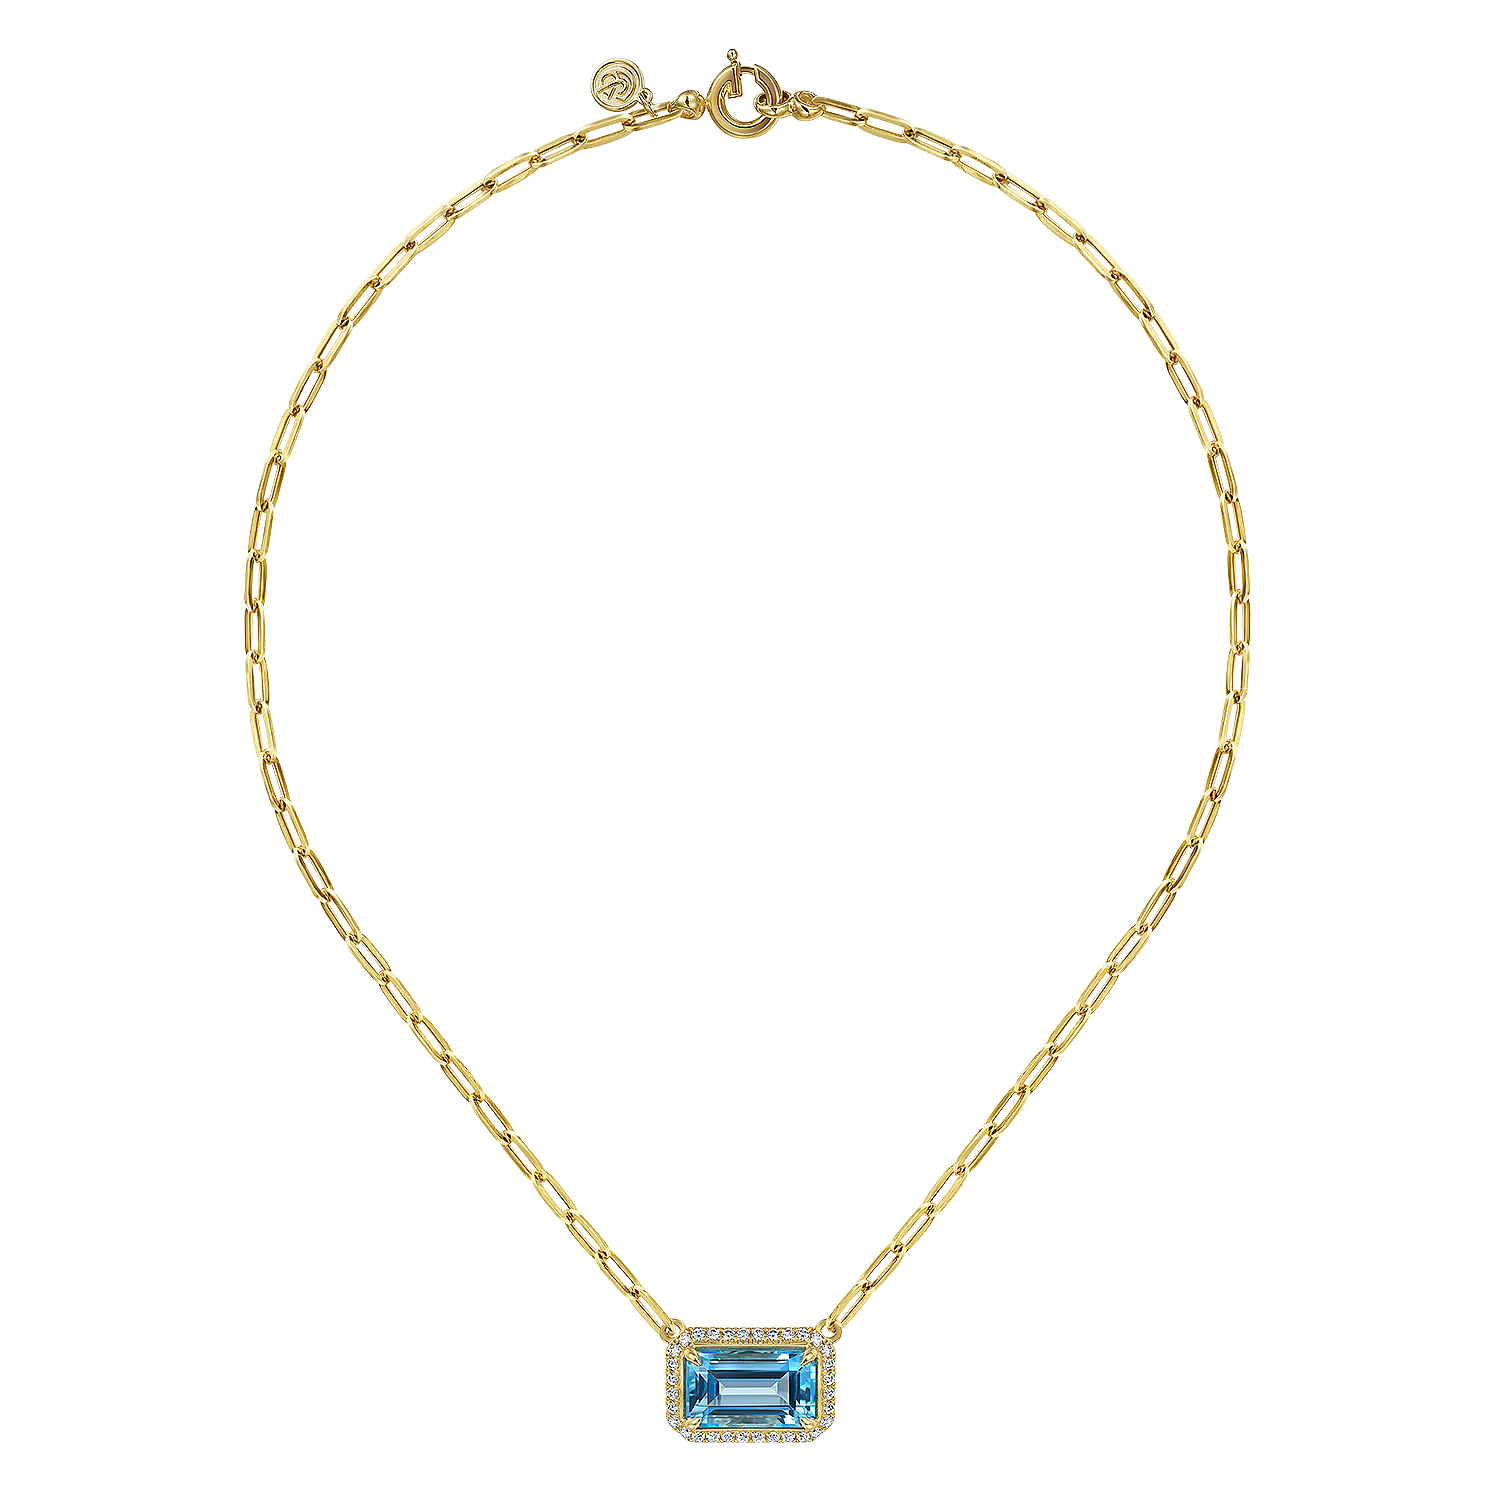 14K Yellow Gold Diamond and Blue Topaz Emerald Cut Necklace With Flower Pattern Gallery